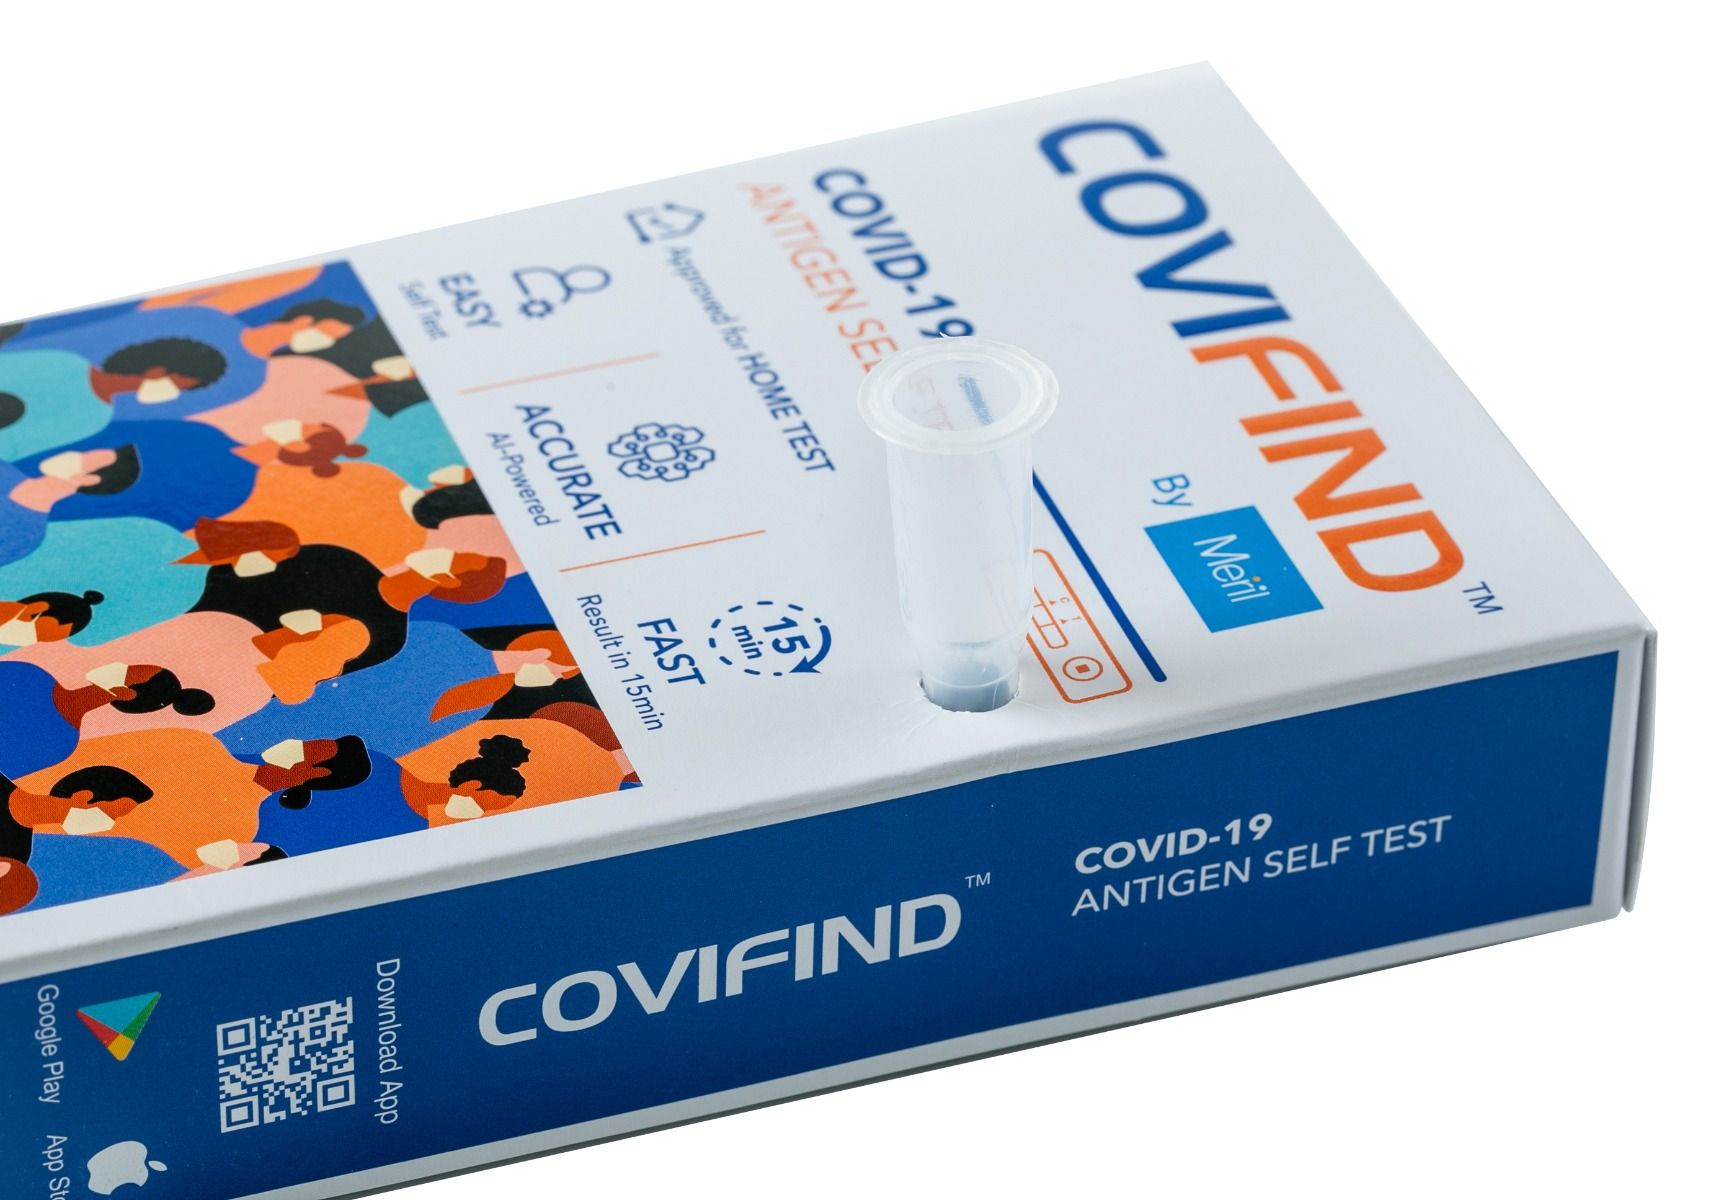 COVIFIND Covid-19 Antigen Self Test Kit, 1 Count, Pack of 1 